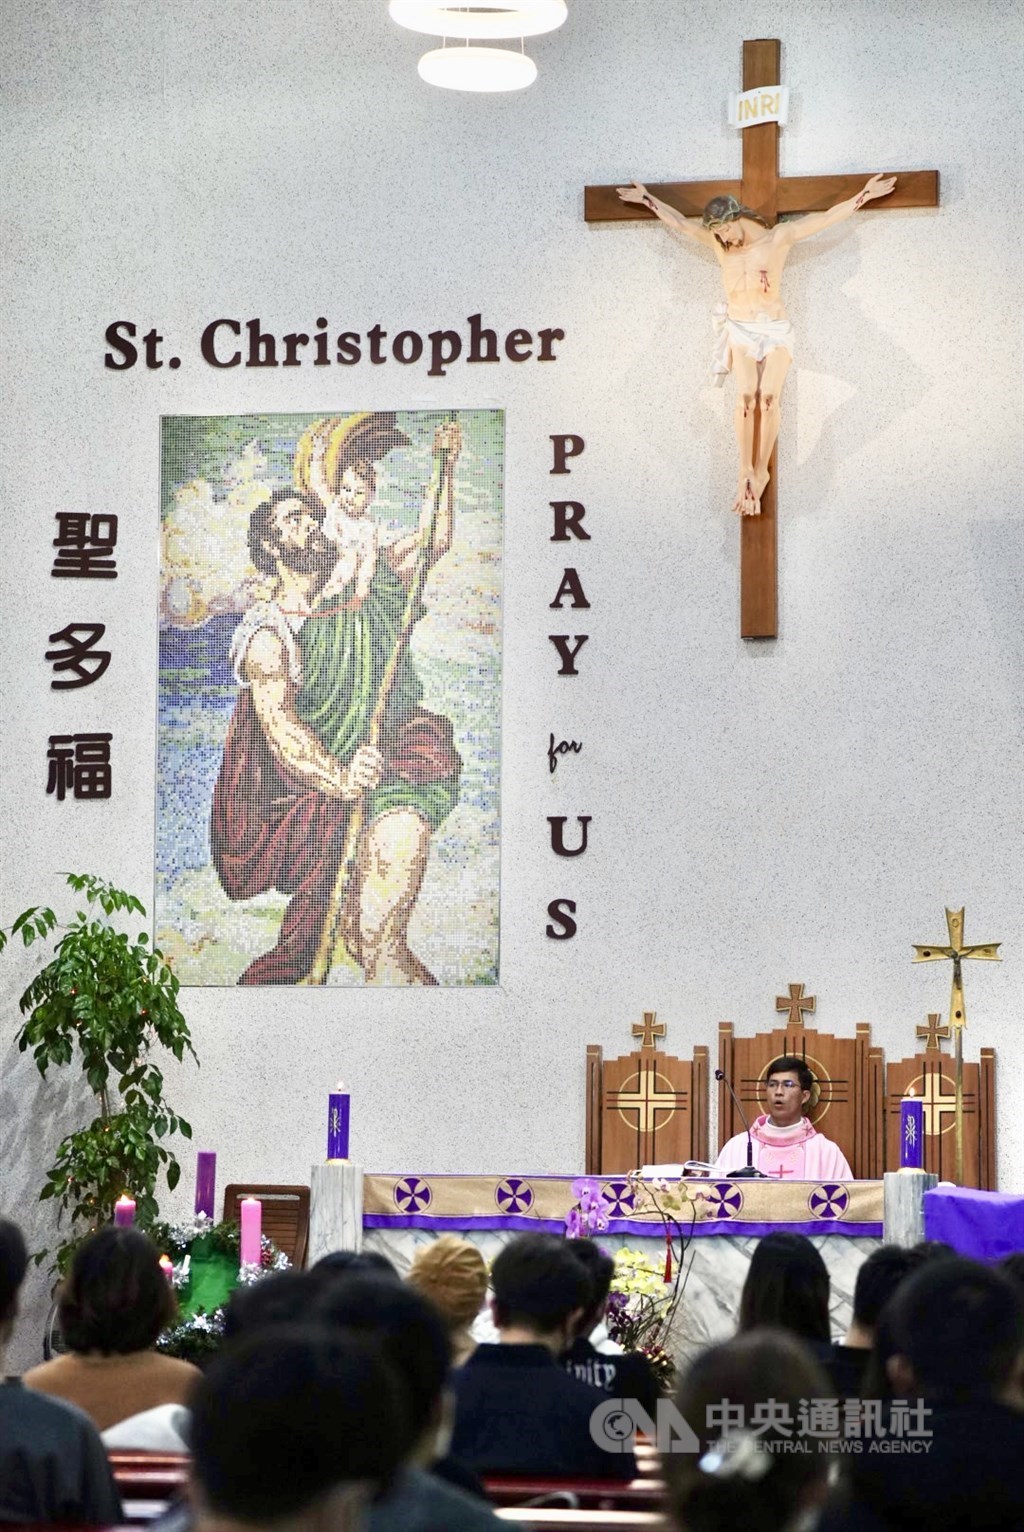 Father Truong Van Khoa leads mass for the Vietnamese community at Saint Christopher’s Church in Taipei on Dec.11.